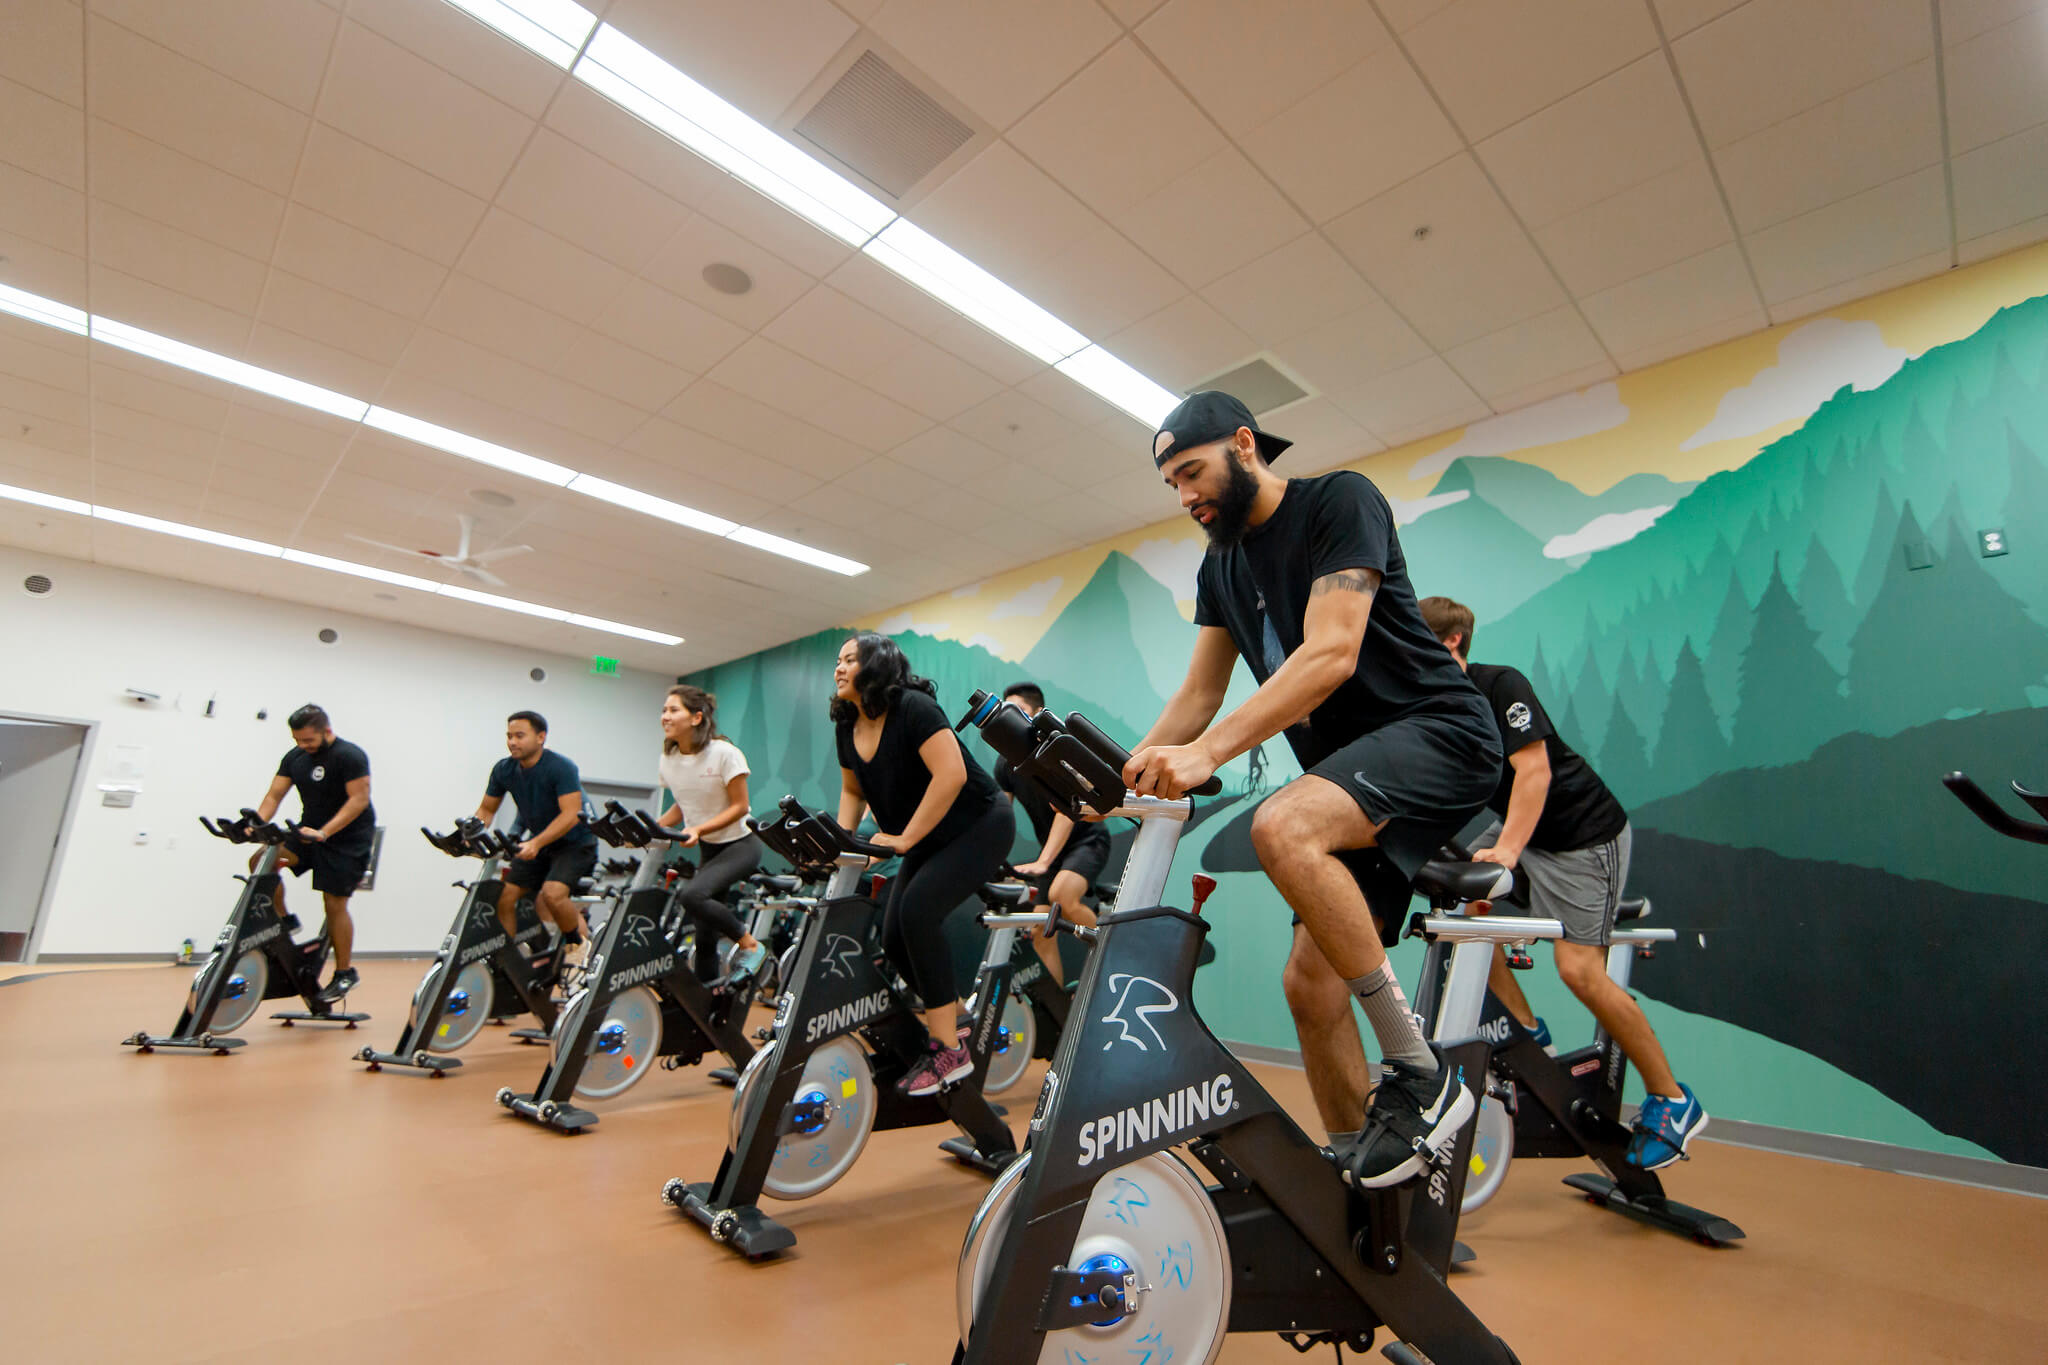 students riding stationary bikes together